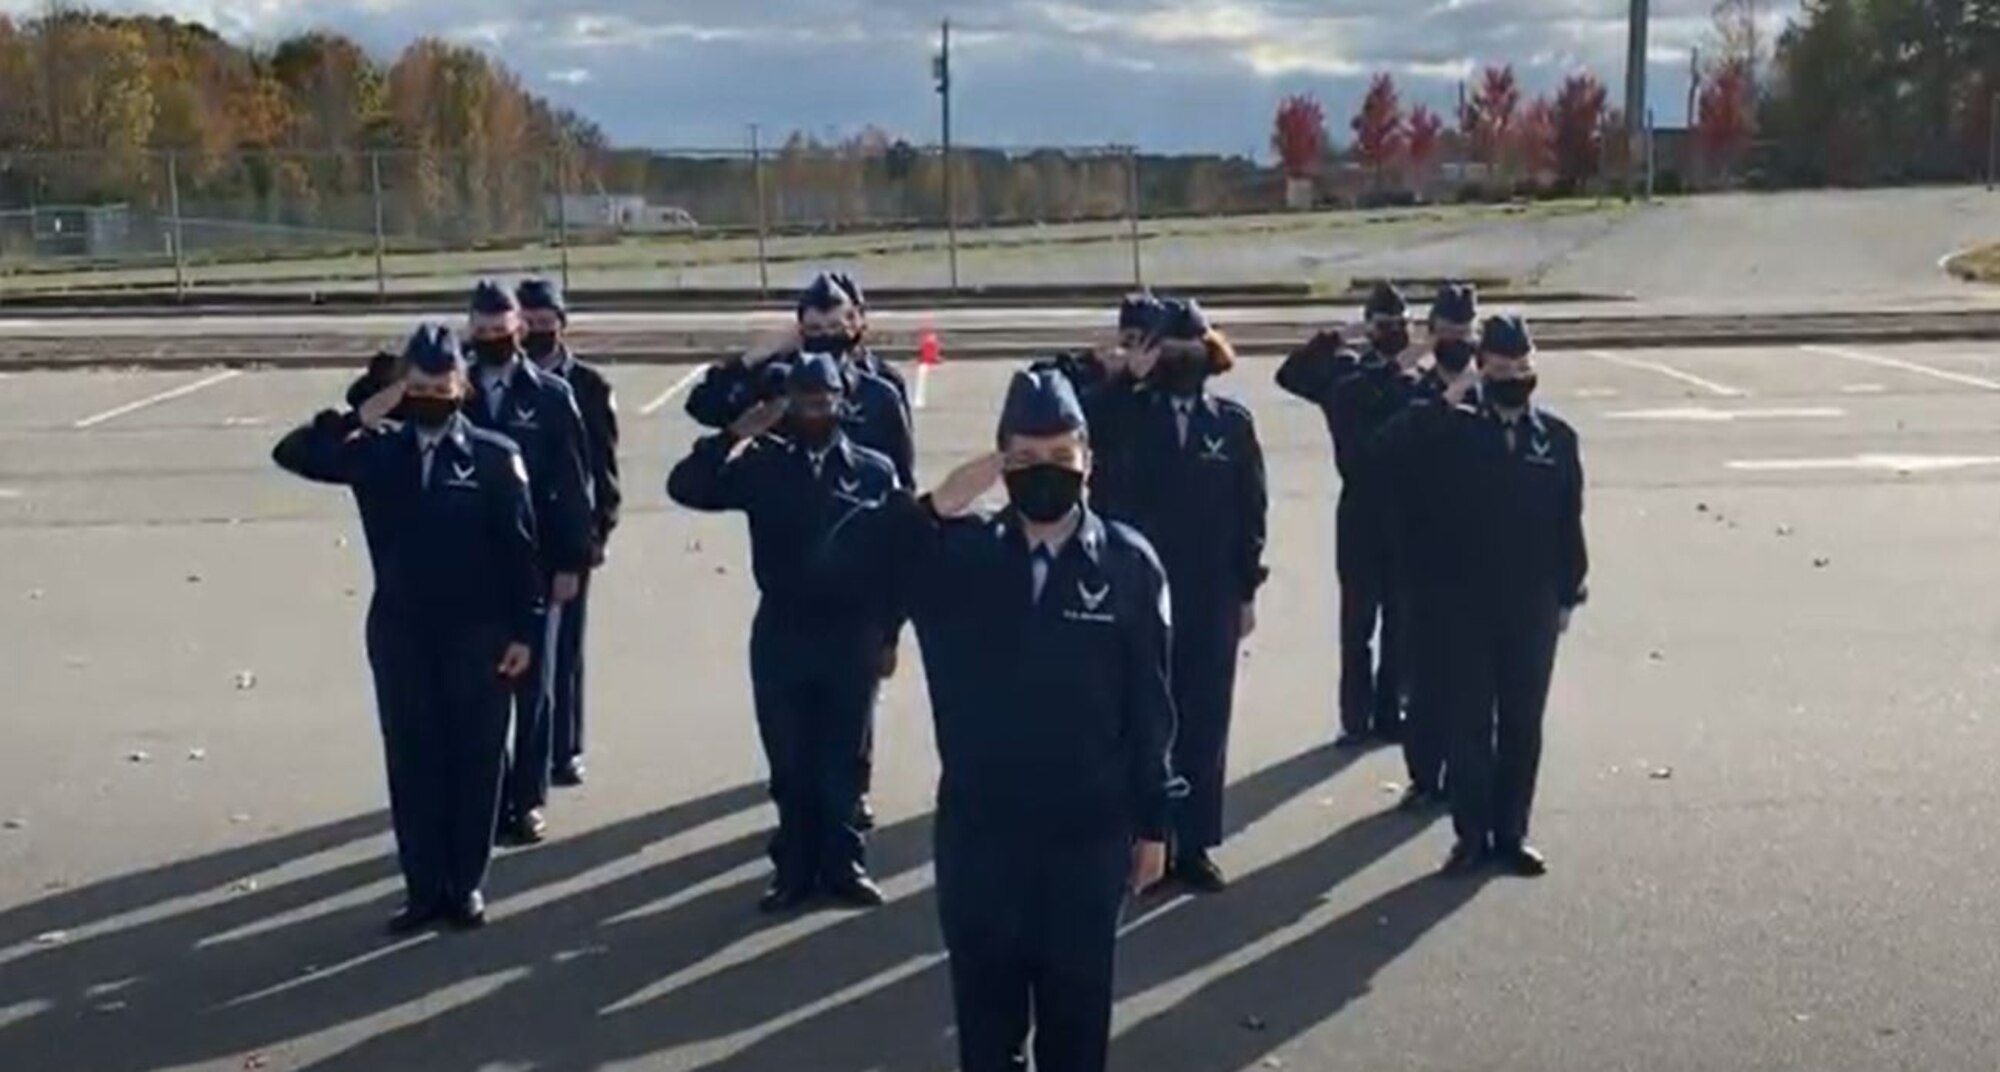 A Clover High School Air Force Junior Reserve Officer Training Guard drill team render a salute during their competition video recording in Clovis, South Carolina. Participating teams recorded their drill events prior to the submission date, to ensure the competition could take place safely amid the COVID pandemic.